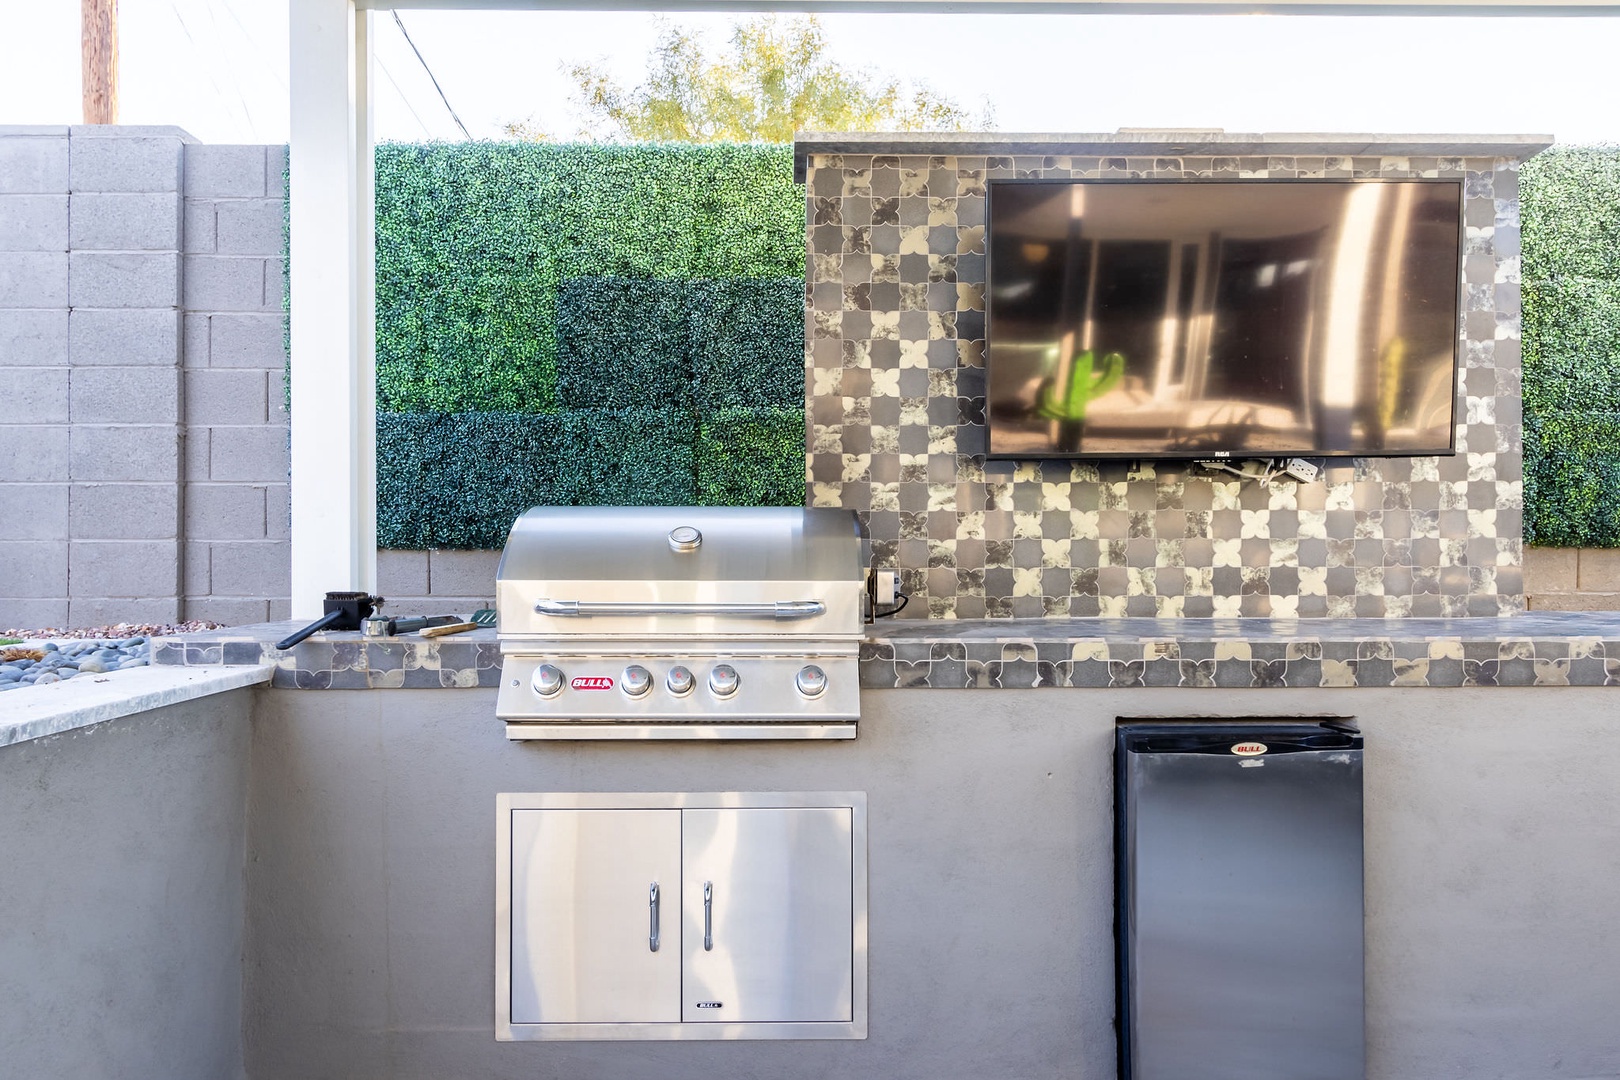 Gas BBQ grill and TV in the outdoor kitchen